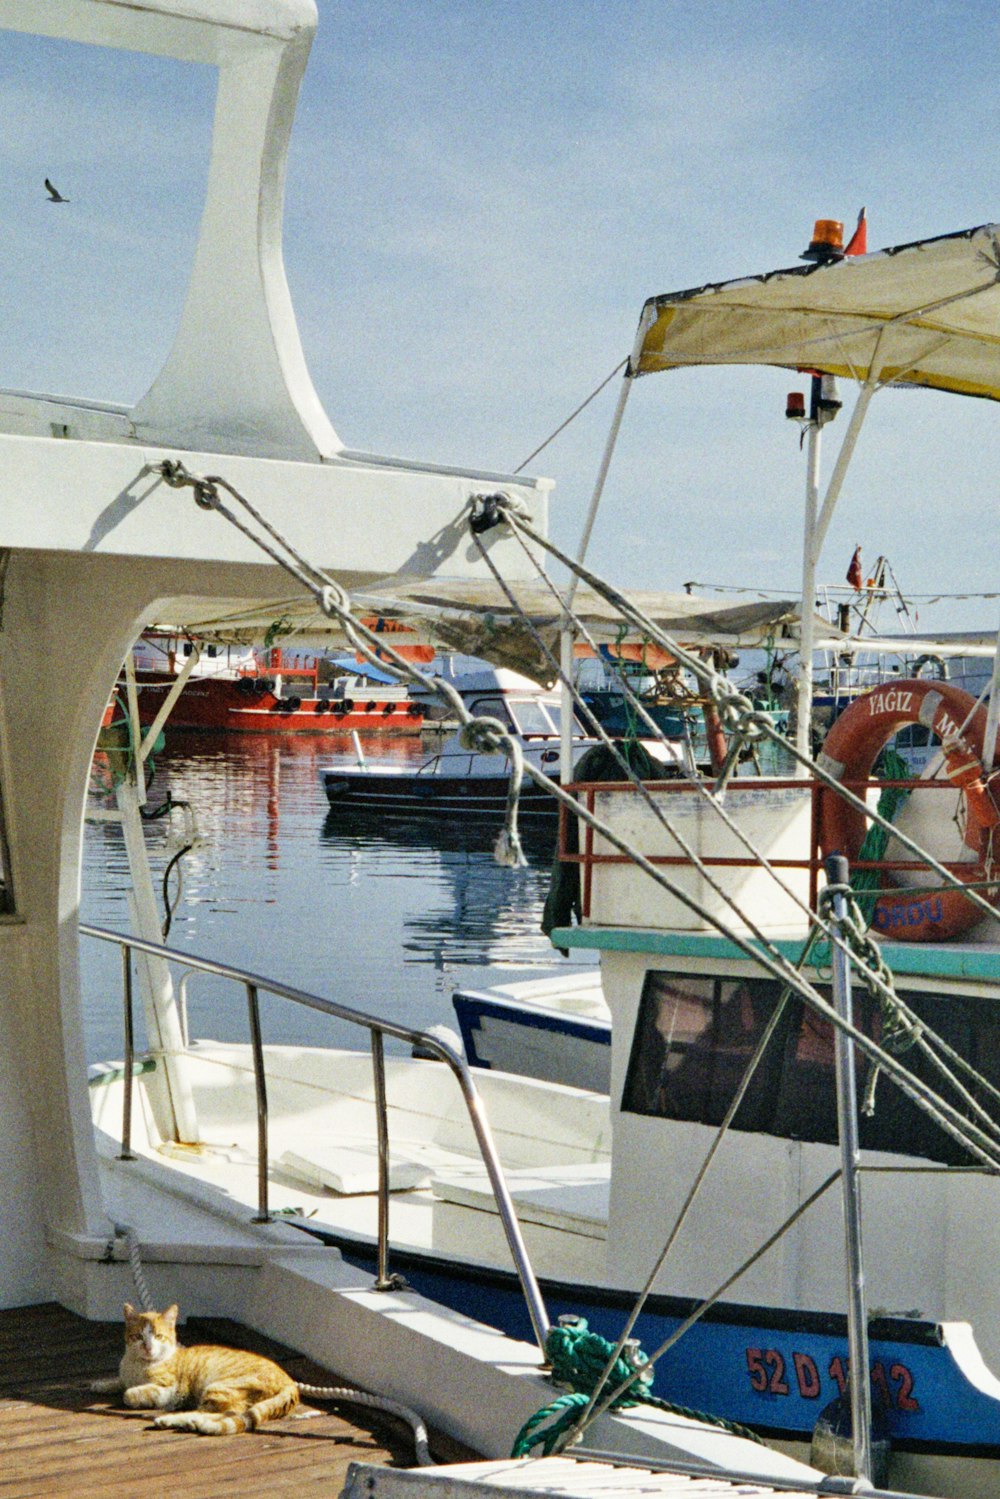 a boat docked at a pier with other boats in the water